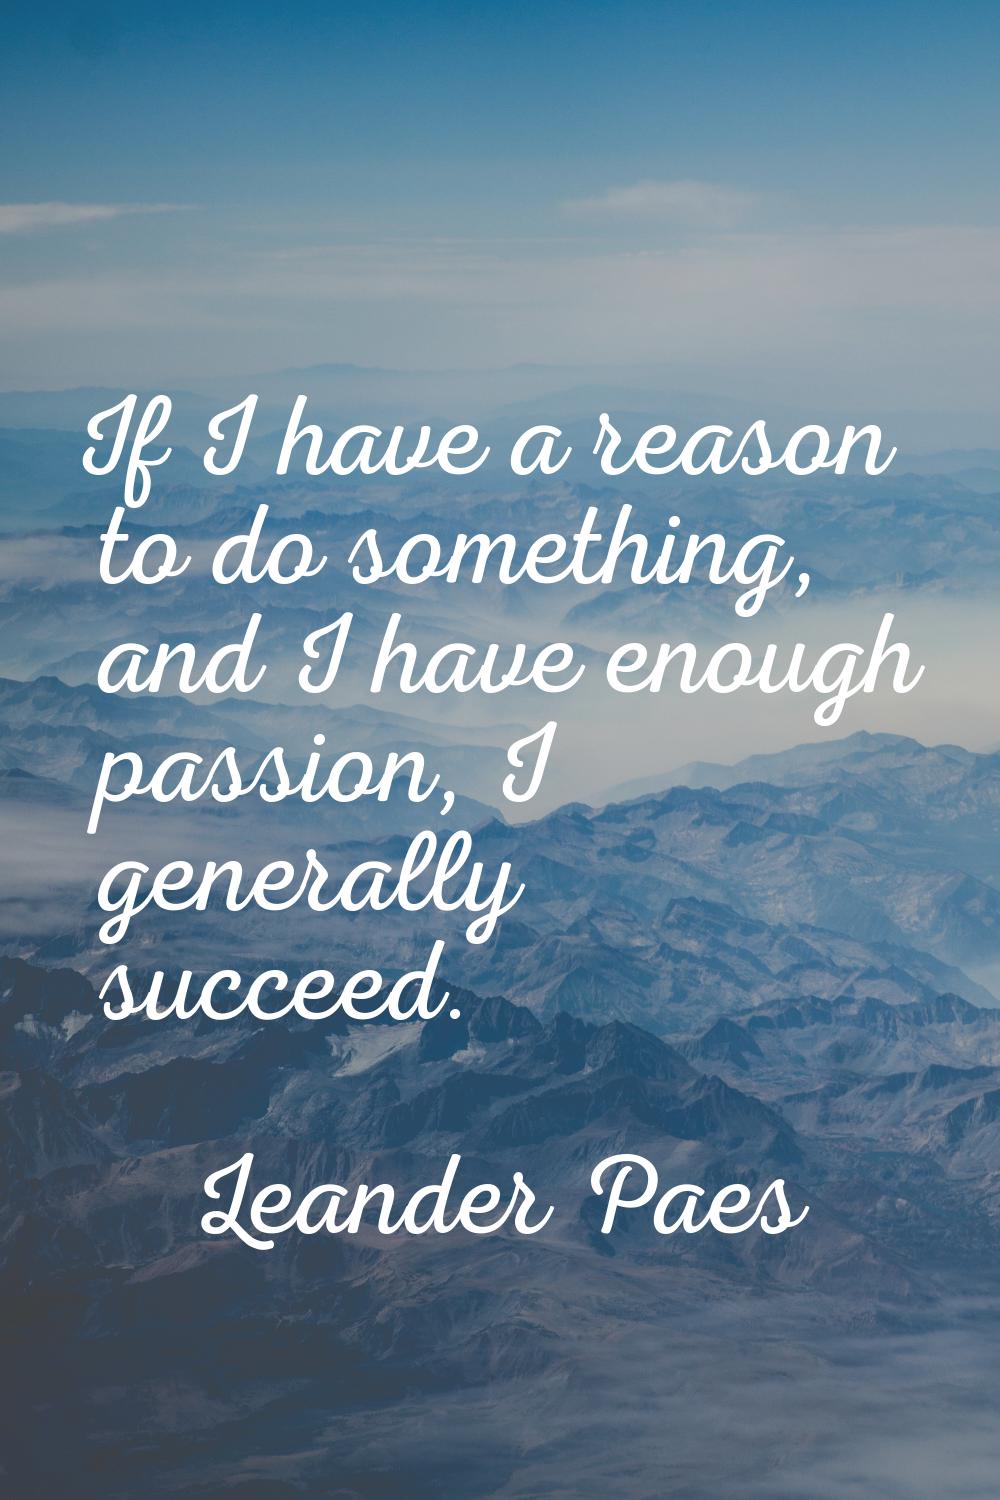 If I have a reason to do something, and I have enough passion, I generally succeed.